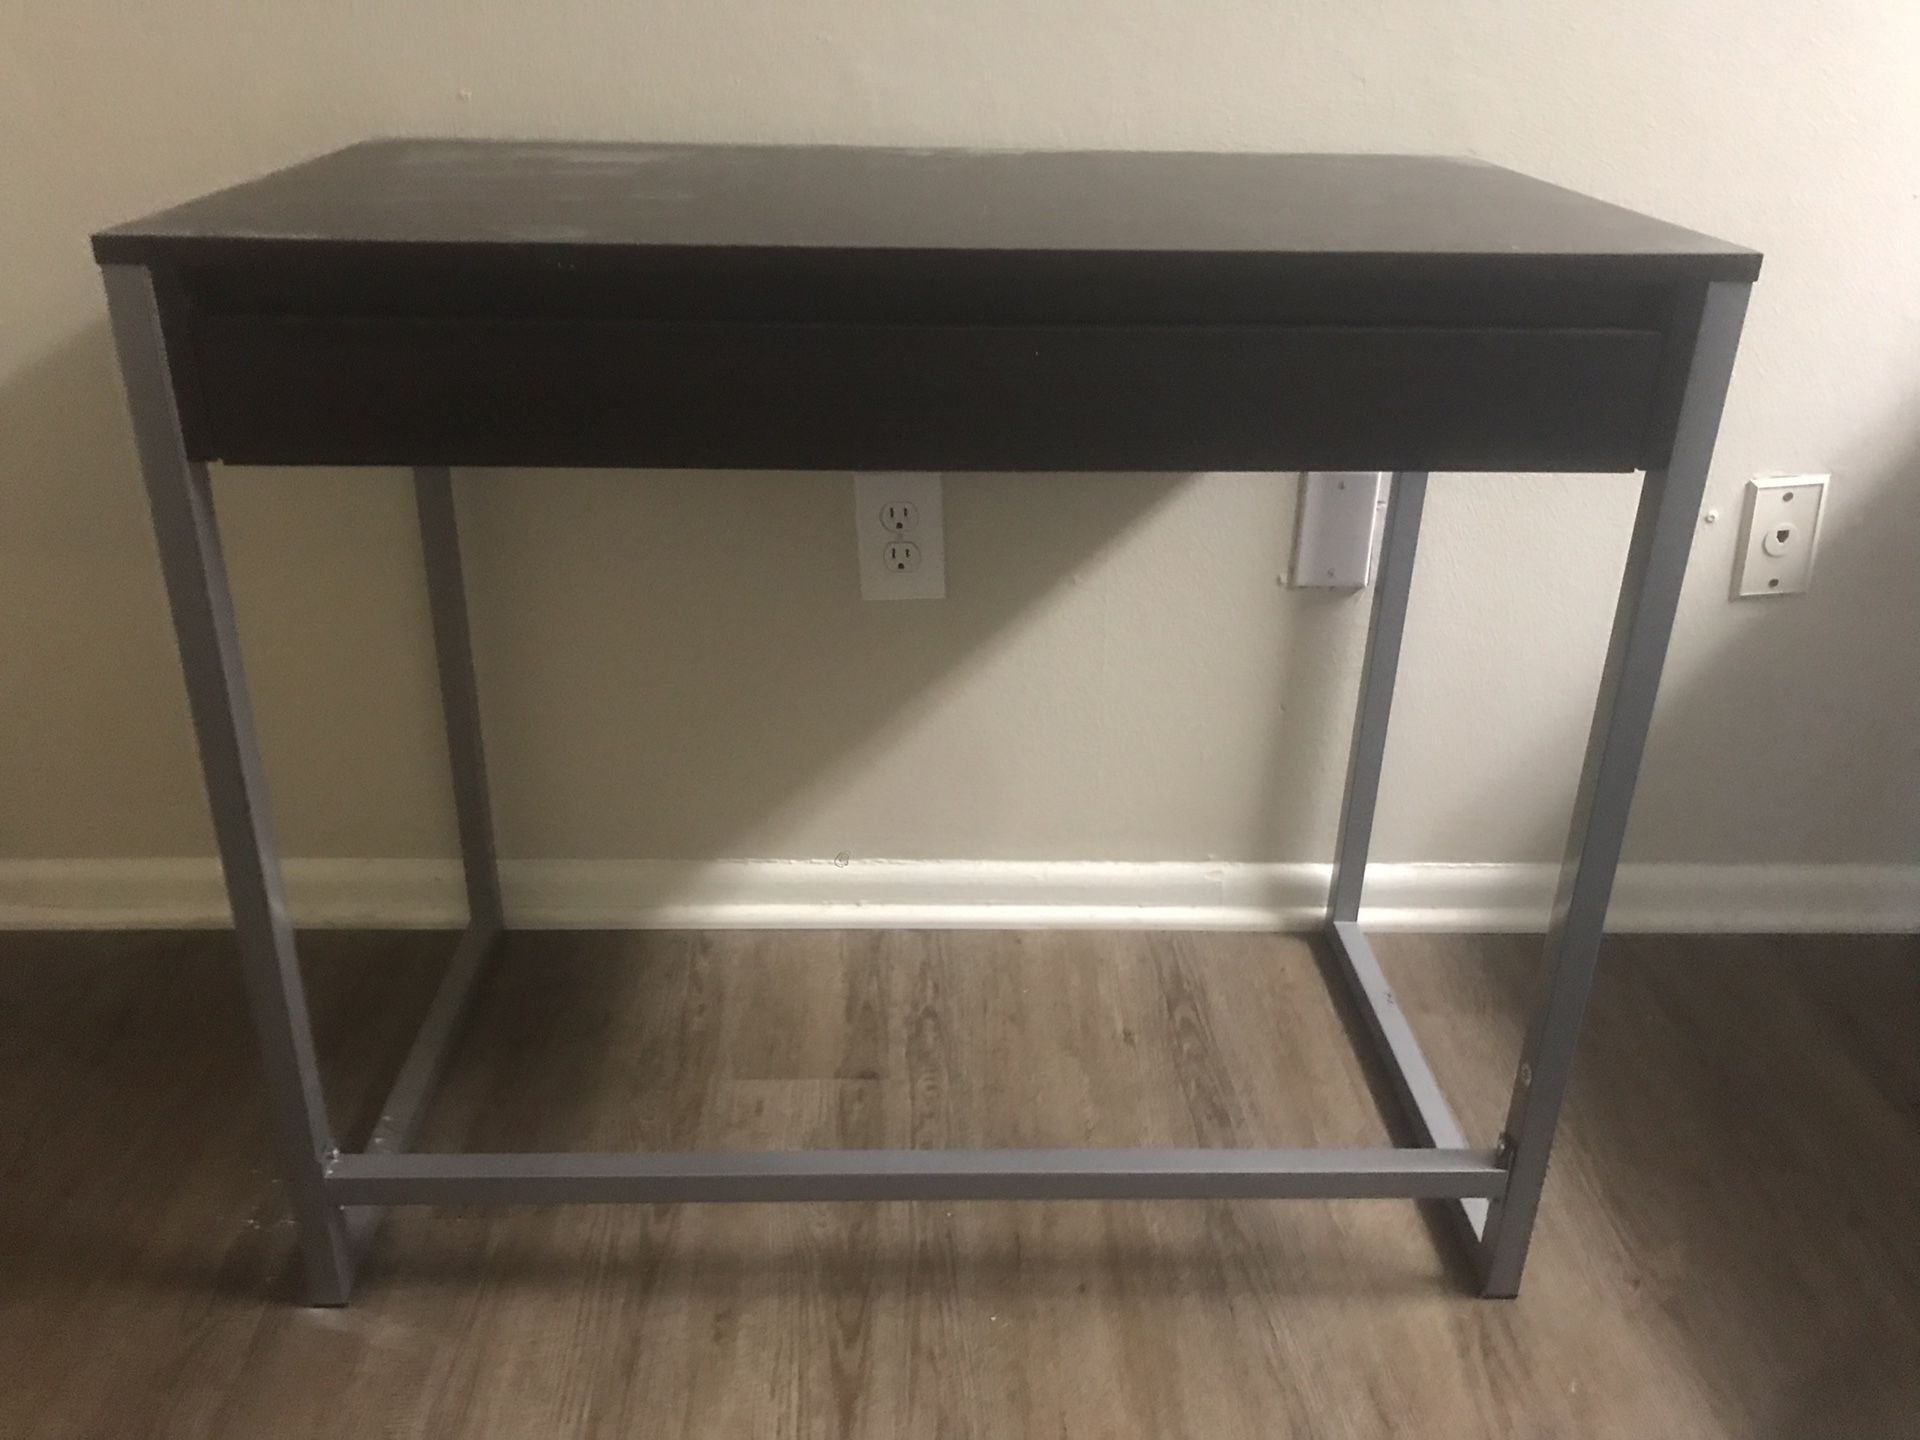 Writing desk from Target!